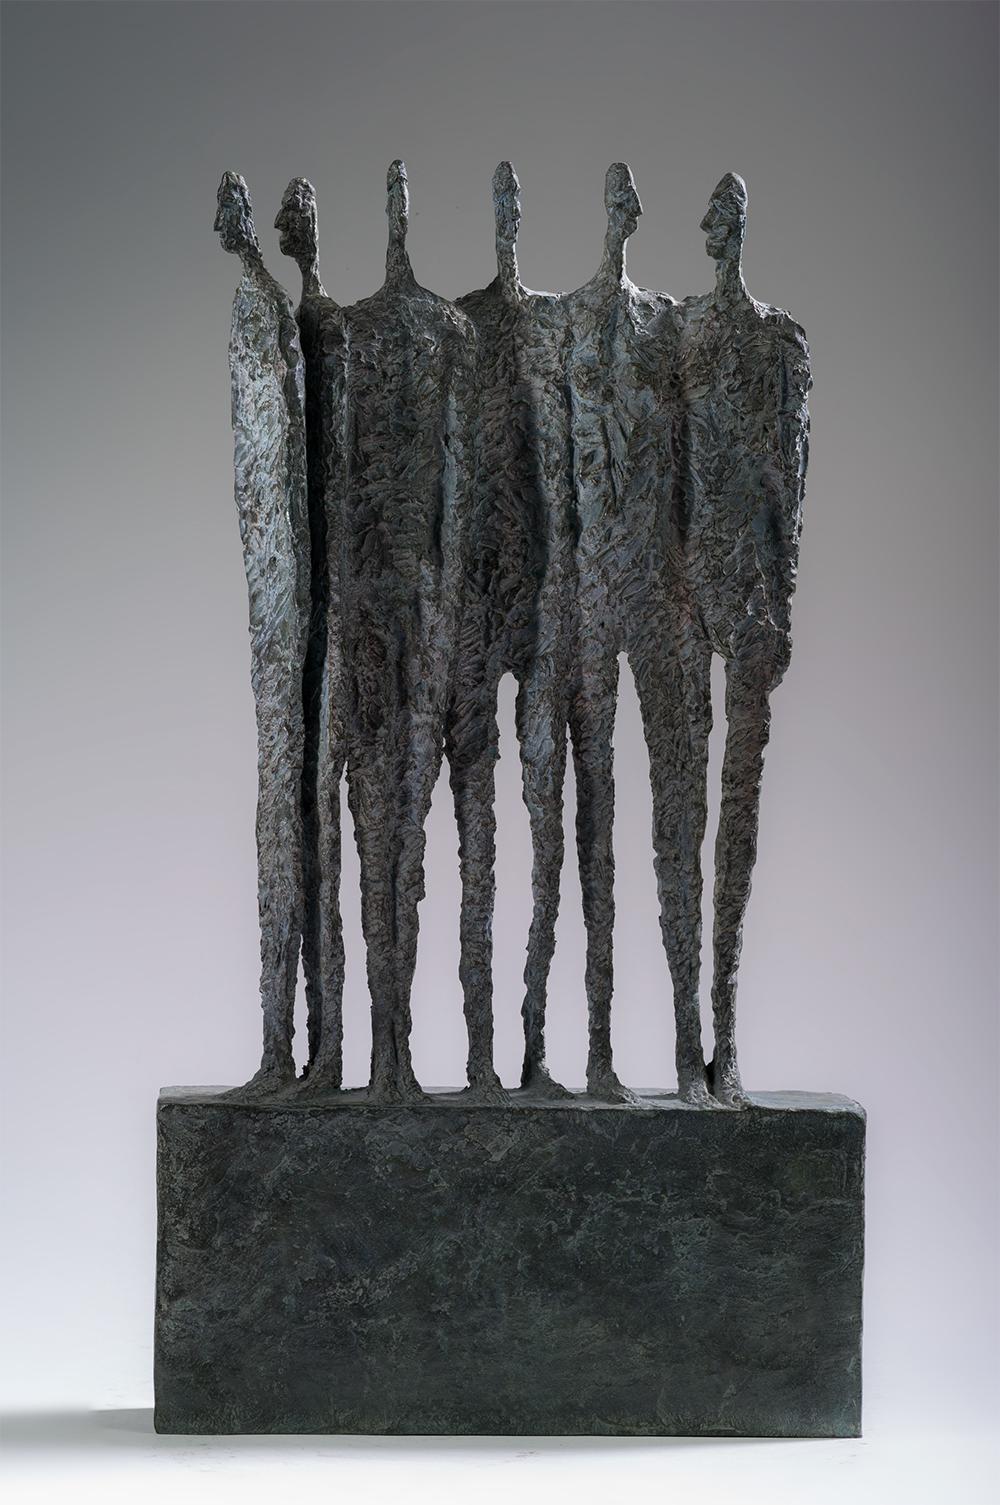 The Group is a bronze sculpture by French contemporary artist Martine Demal, dimensions are 40 × 21.5 × 5.5 cm (15.7 × 8.5 × 2.2 in). 
The sculpture is signed and numbered, it is part of a limited edition of 8 editions + 4 artist’s proofs, and comes